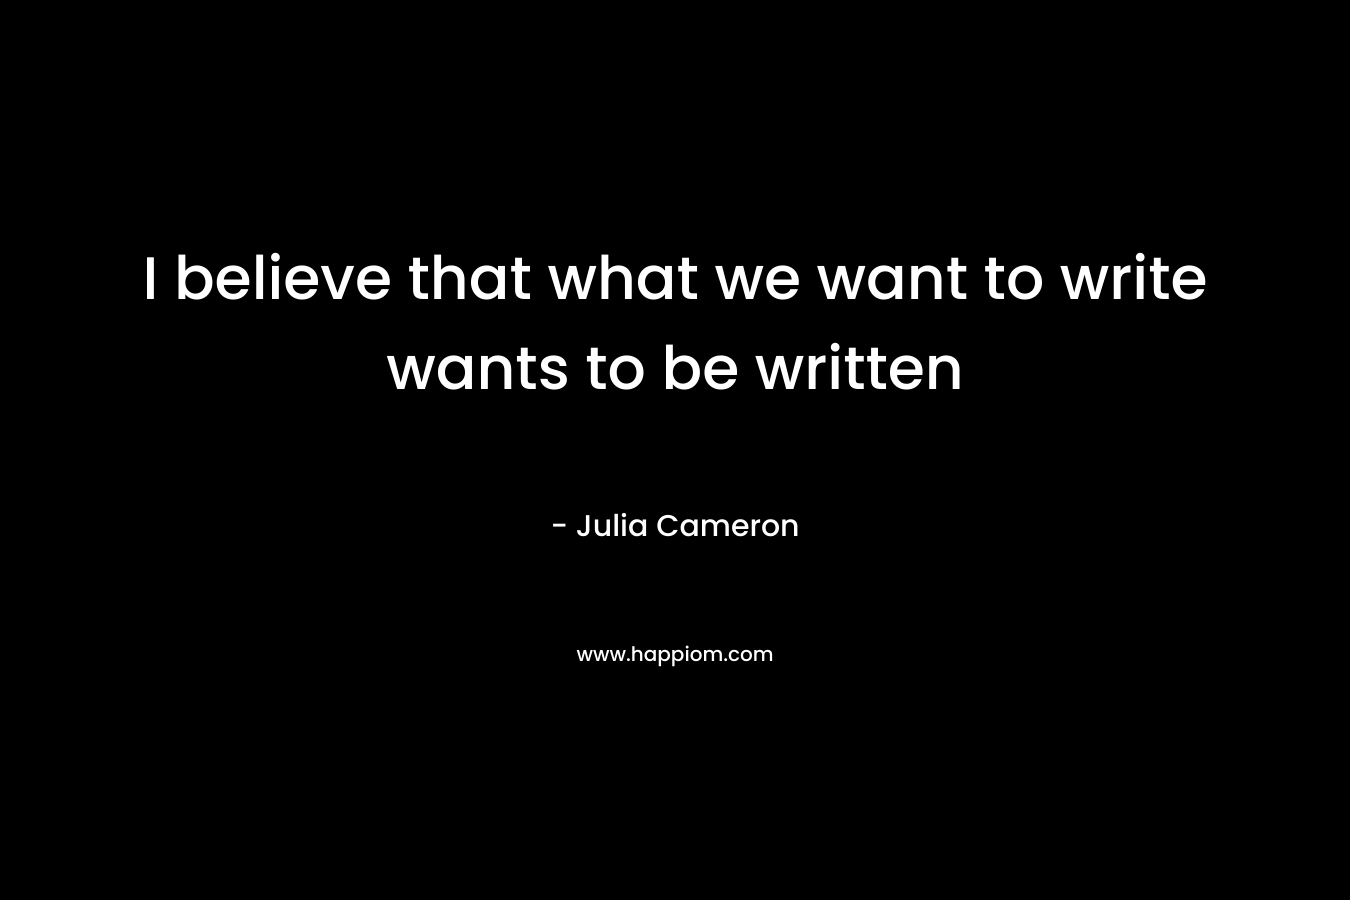 I believe that what we want to write wants to be written